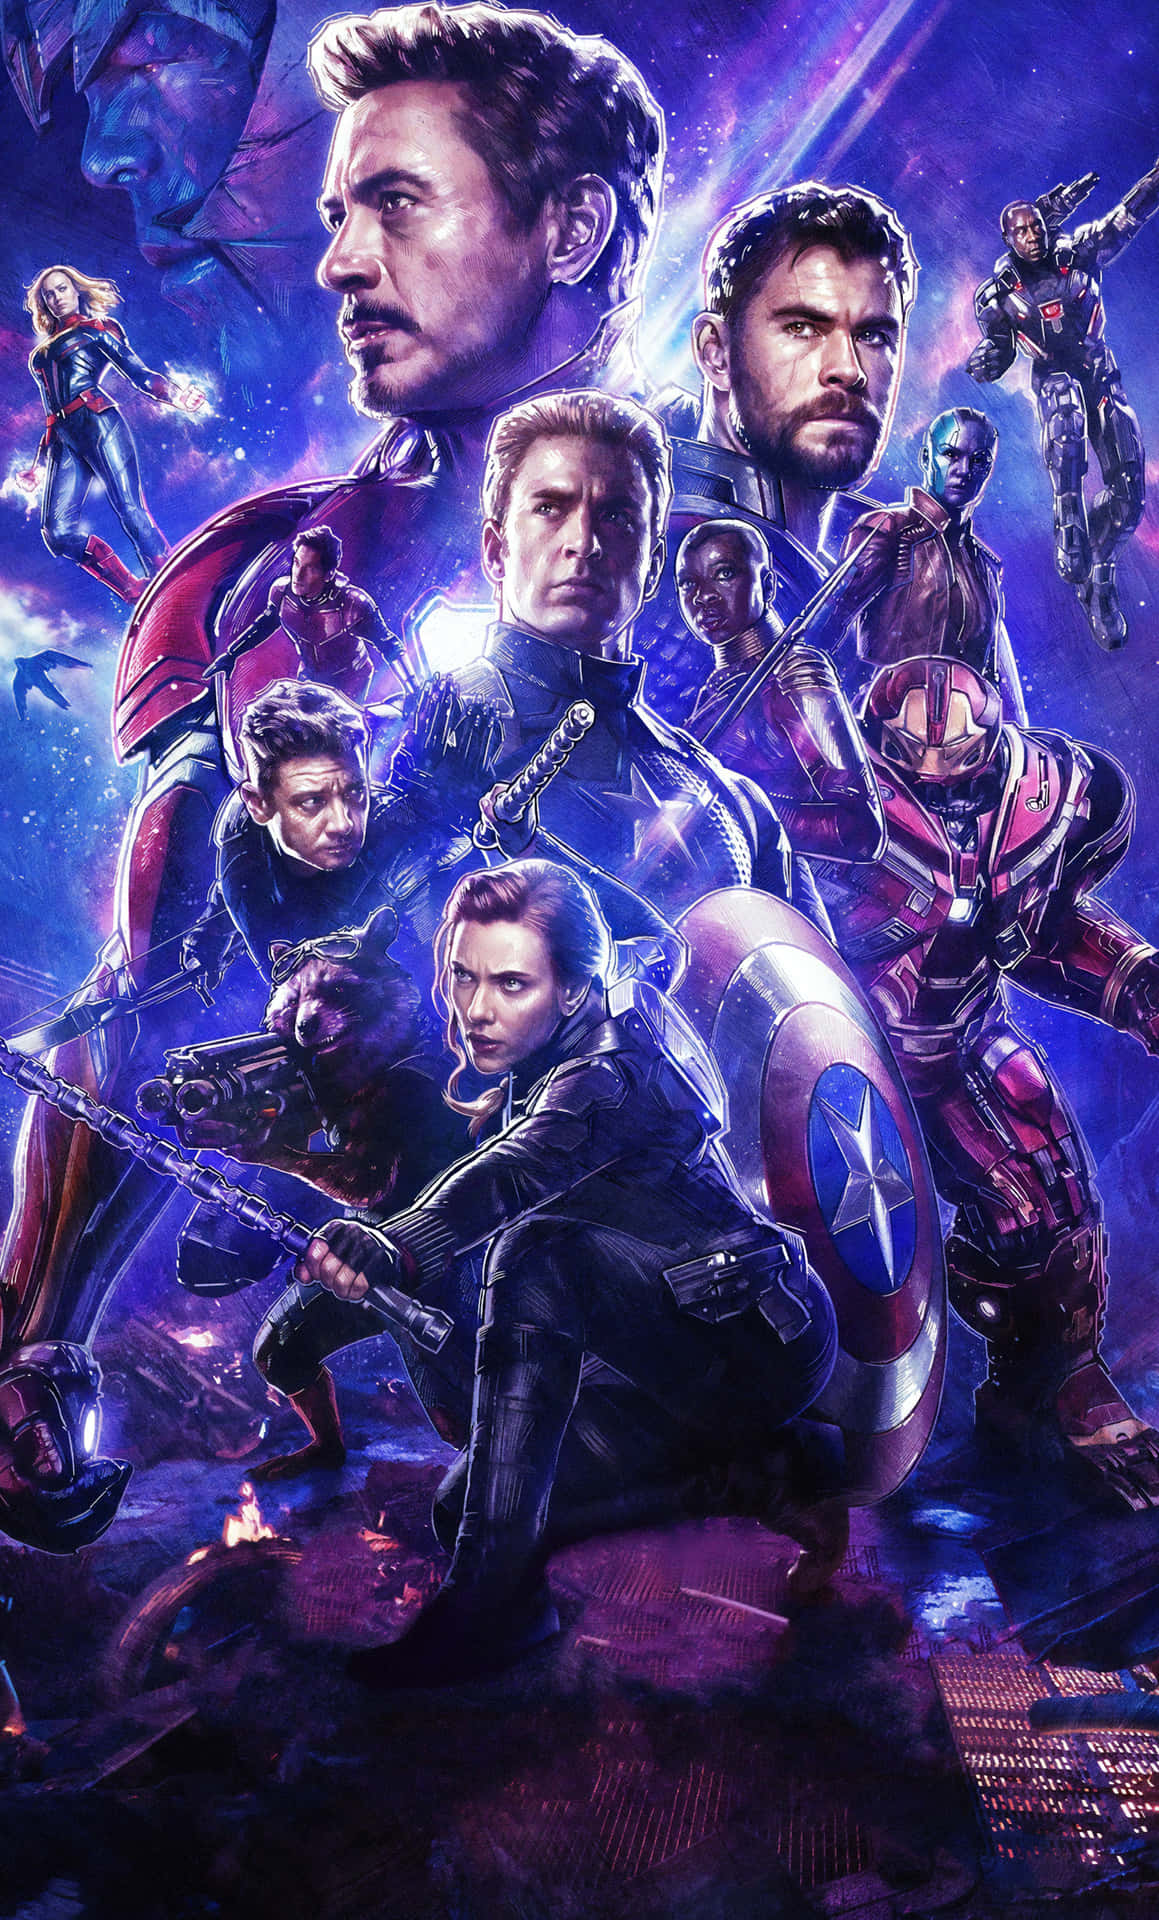 Get the Avengers Endgame look on your iPhone Wallpaper